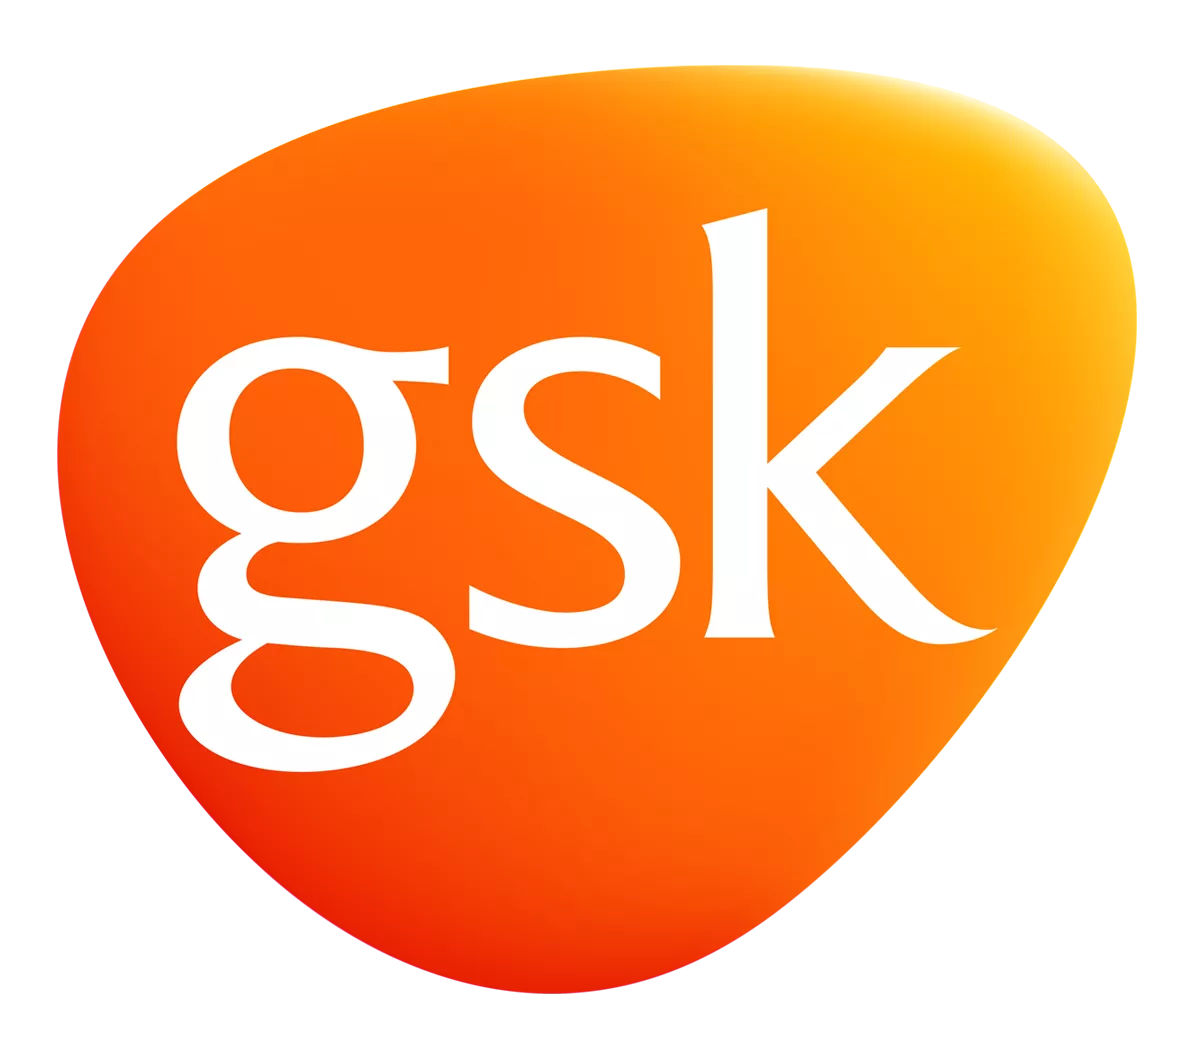 gsk and board software